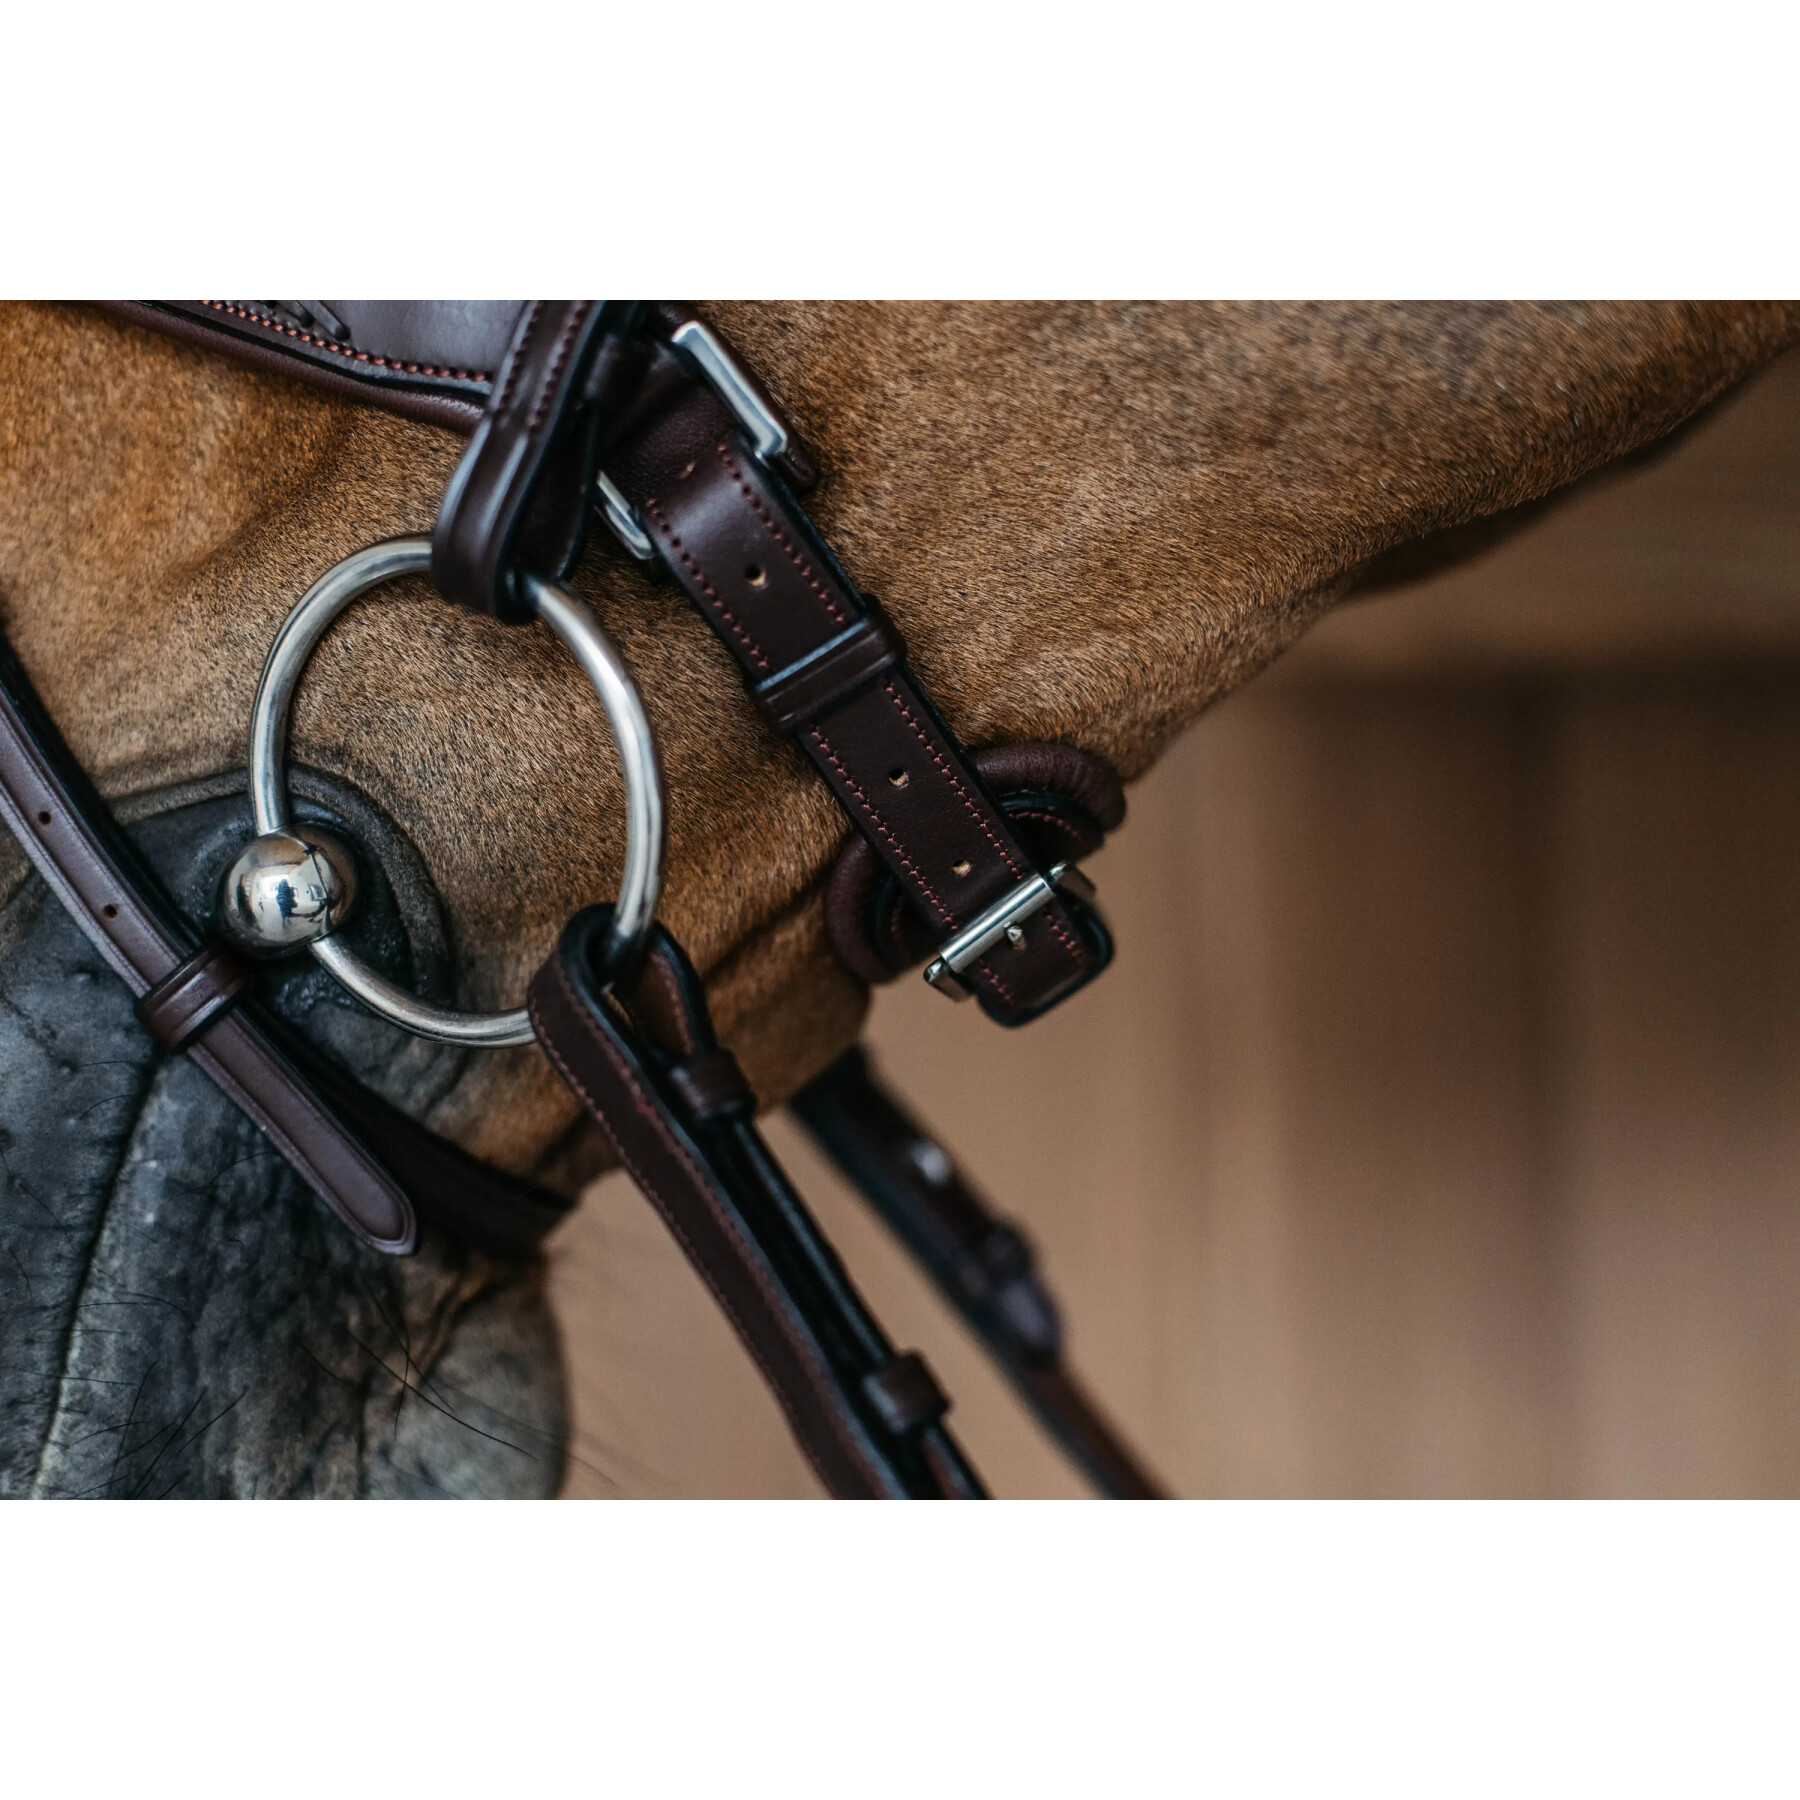 English-combined riding halter with pull-back noseband Dy’on